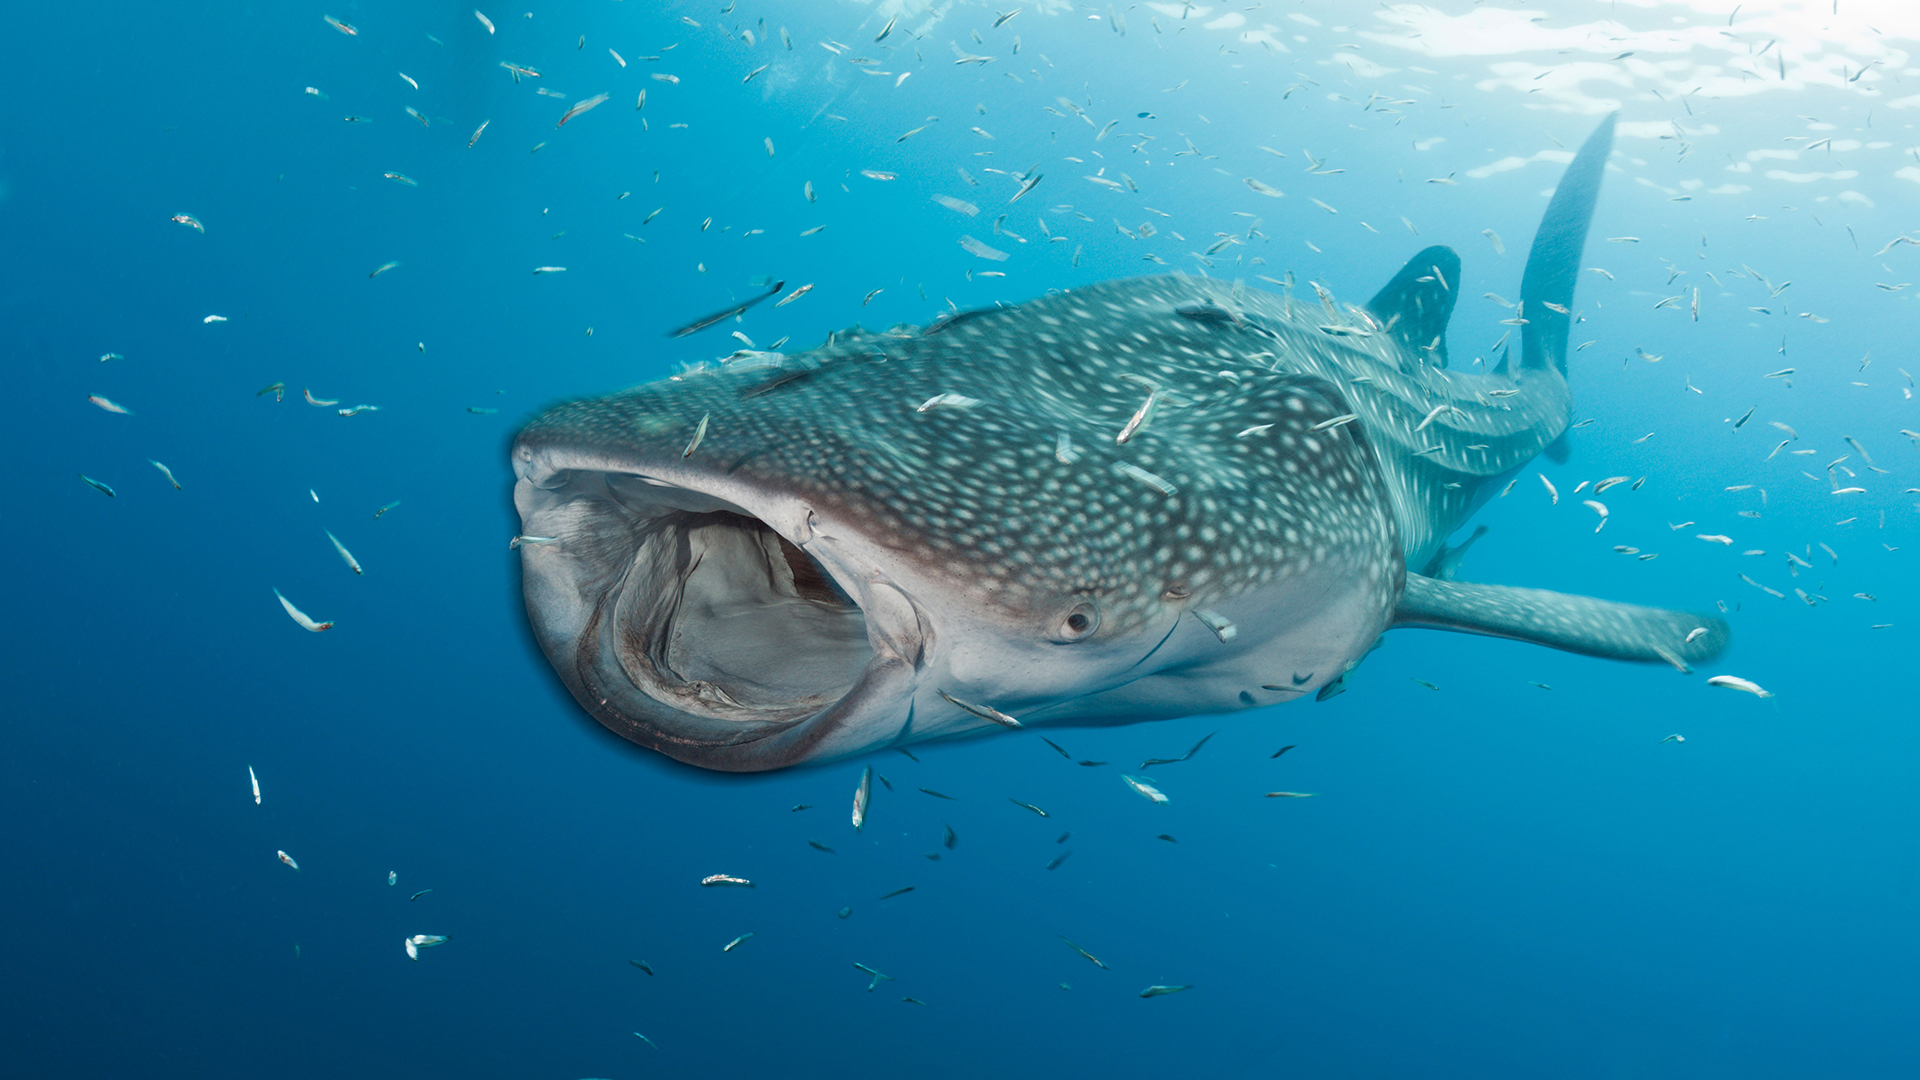 Whale sharks are the world's biggest omnivores, scientists